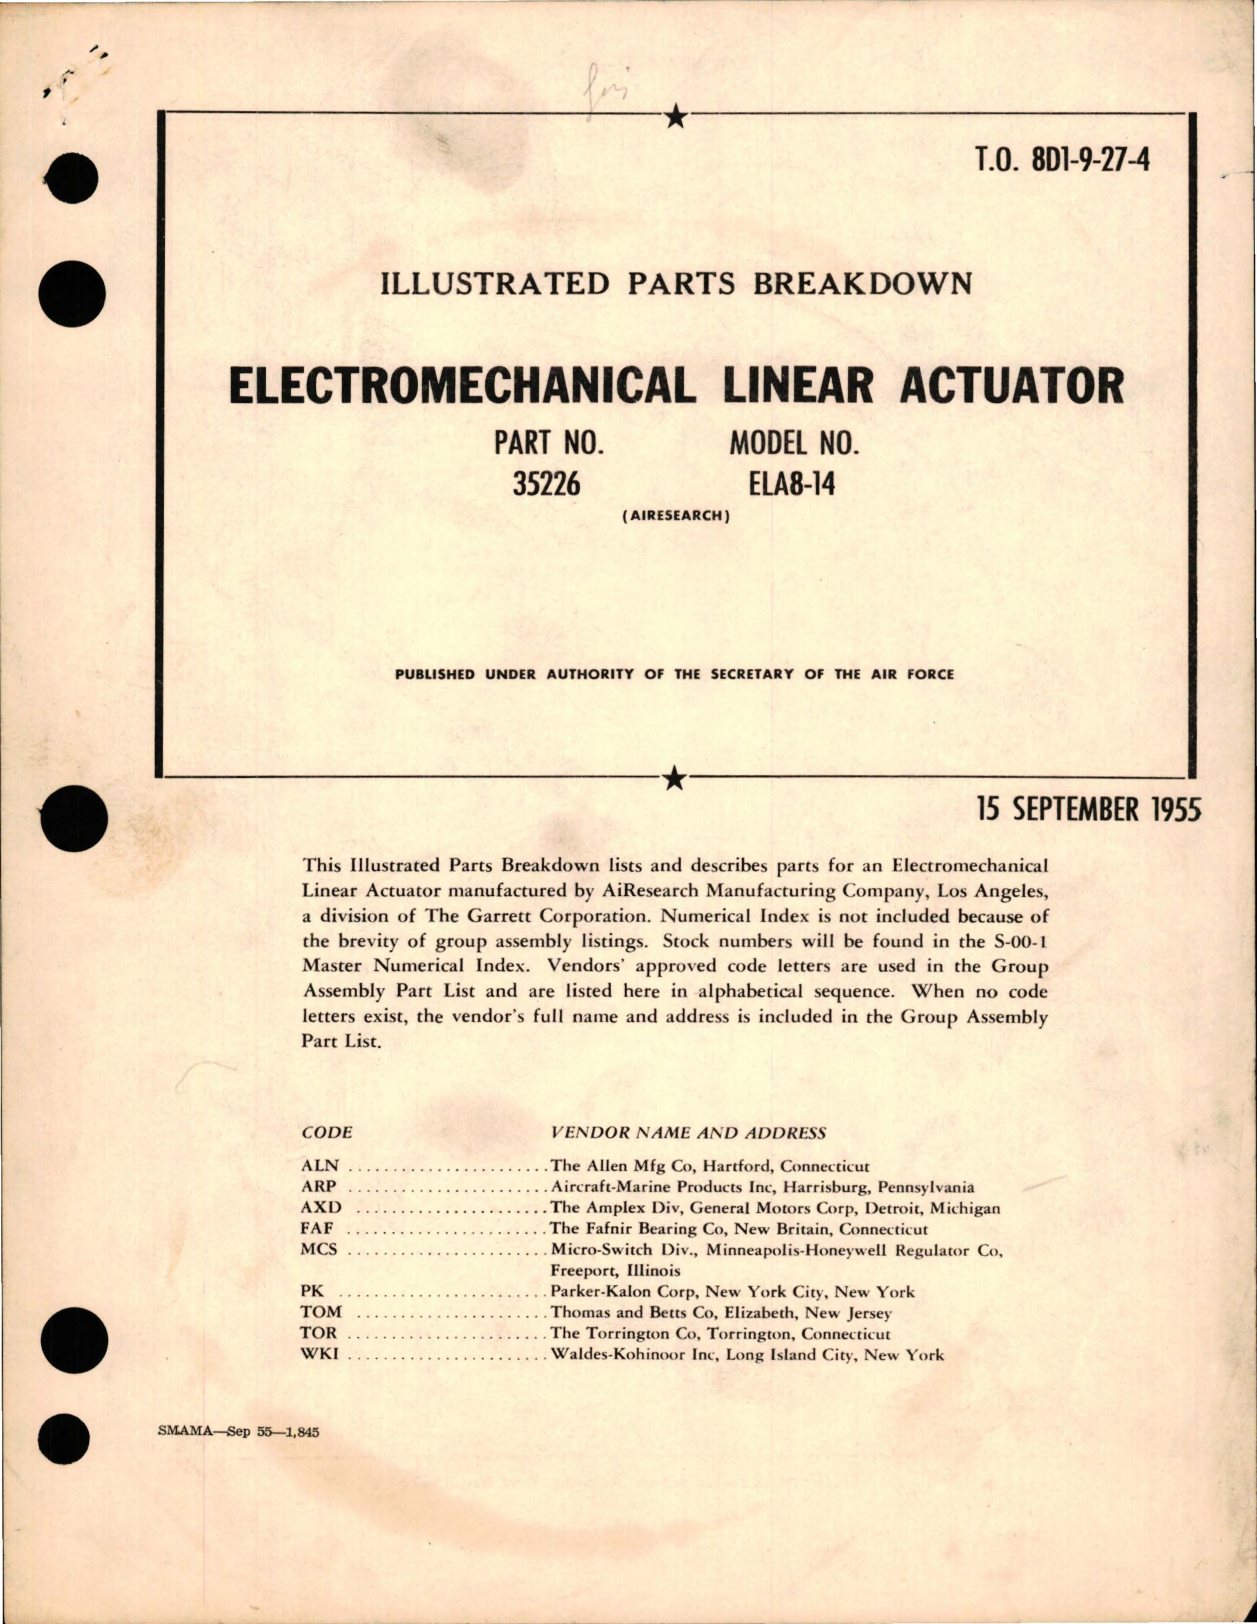 Sample page 1 from AirCorps Library document: Illustrated Parts Breakdown for Electromechanical Linear Actuator - Part 35226 - Model ELA8-14